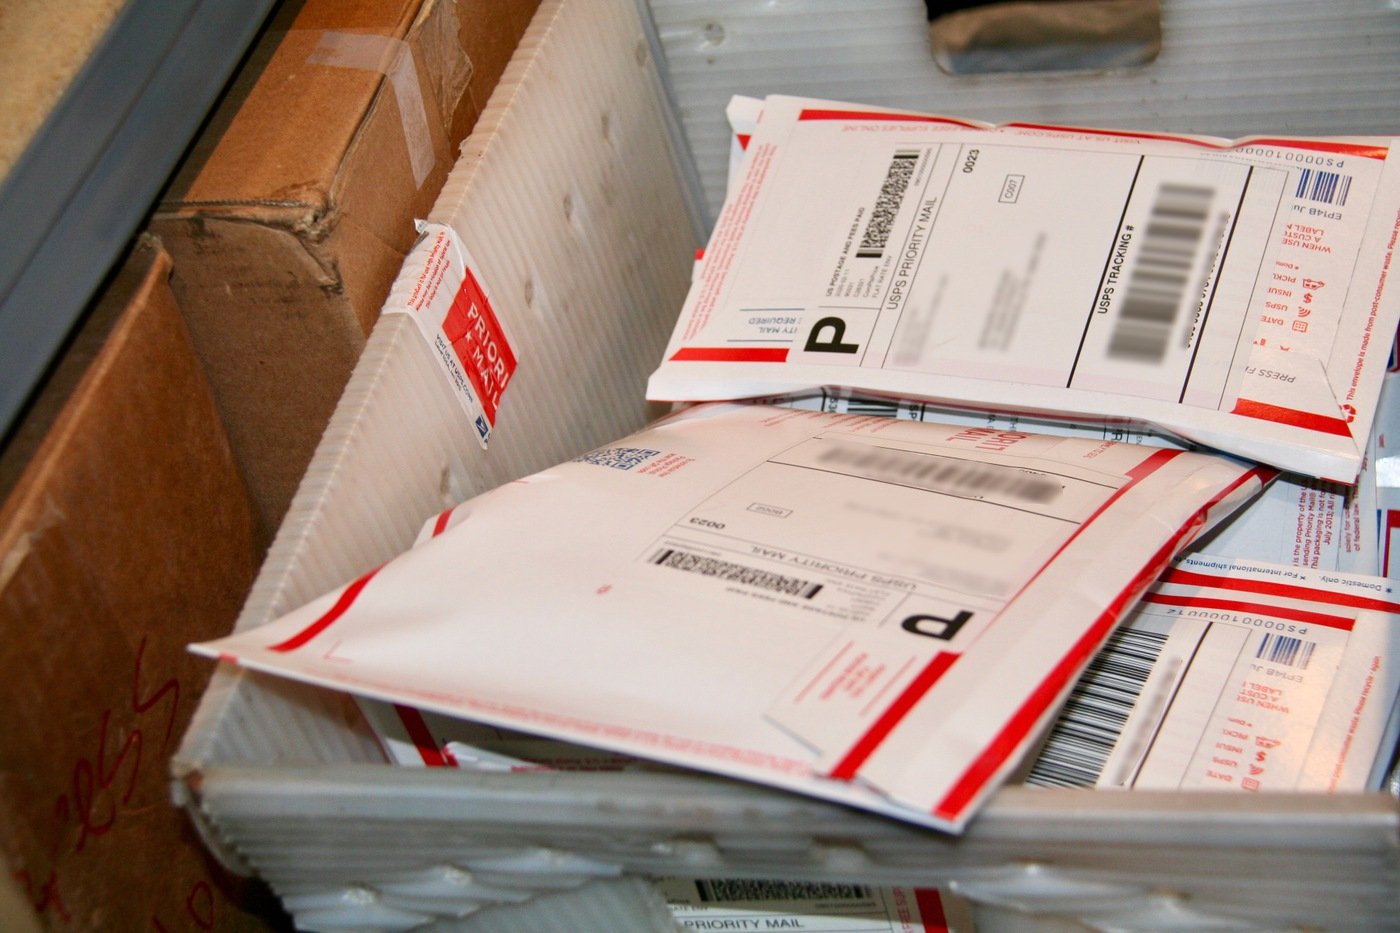 A mailbox containing addressed packages found during a JCODE search in Los Angeles in March 2020.